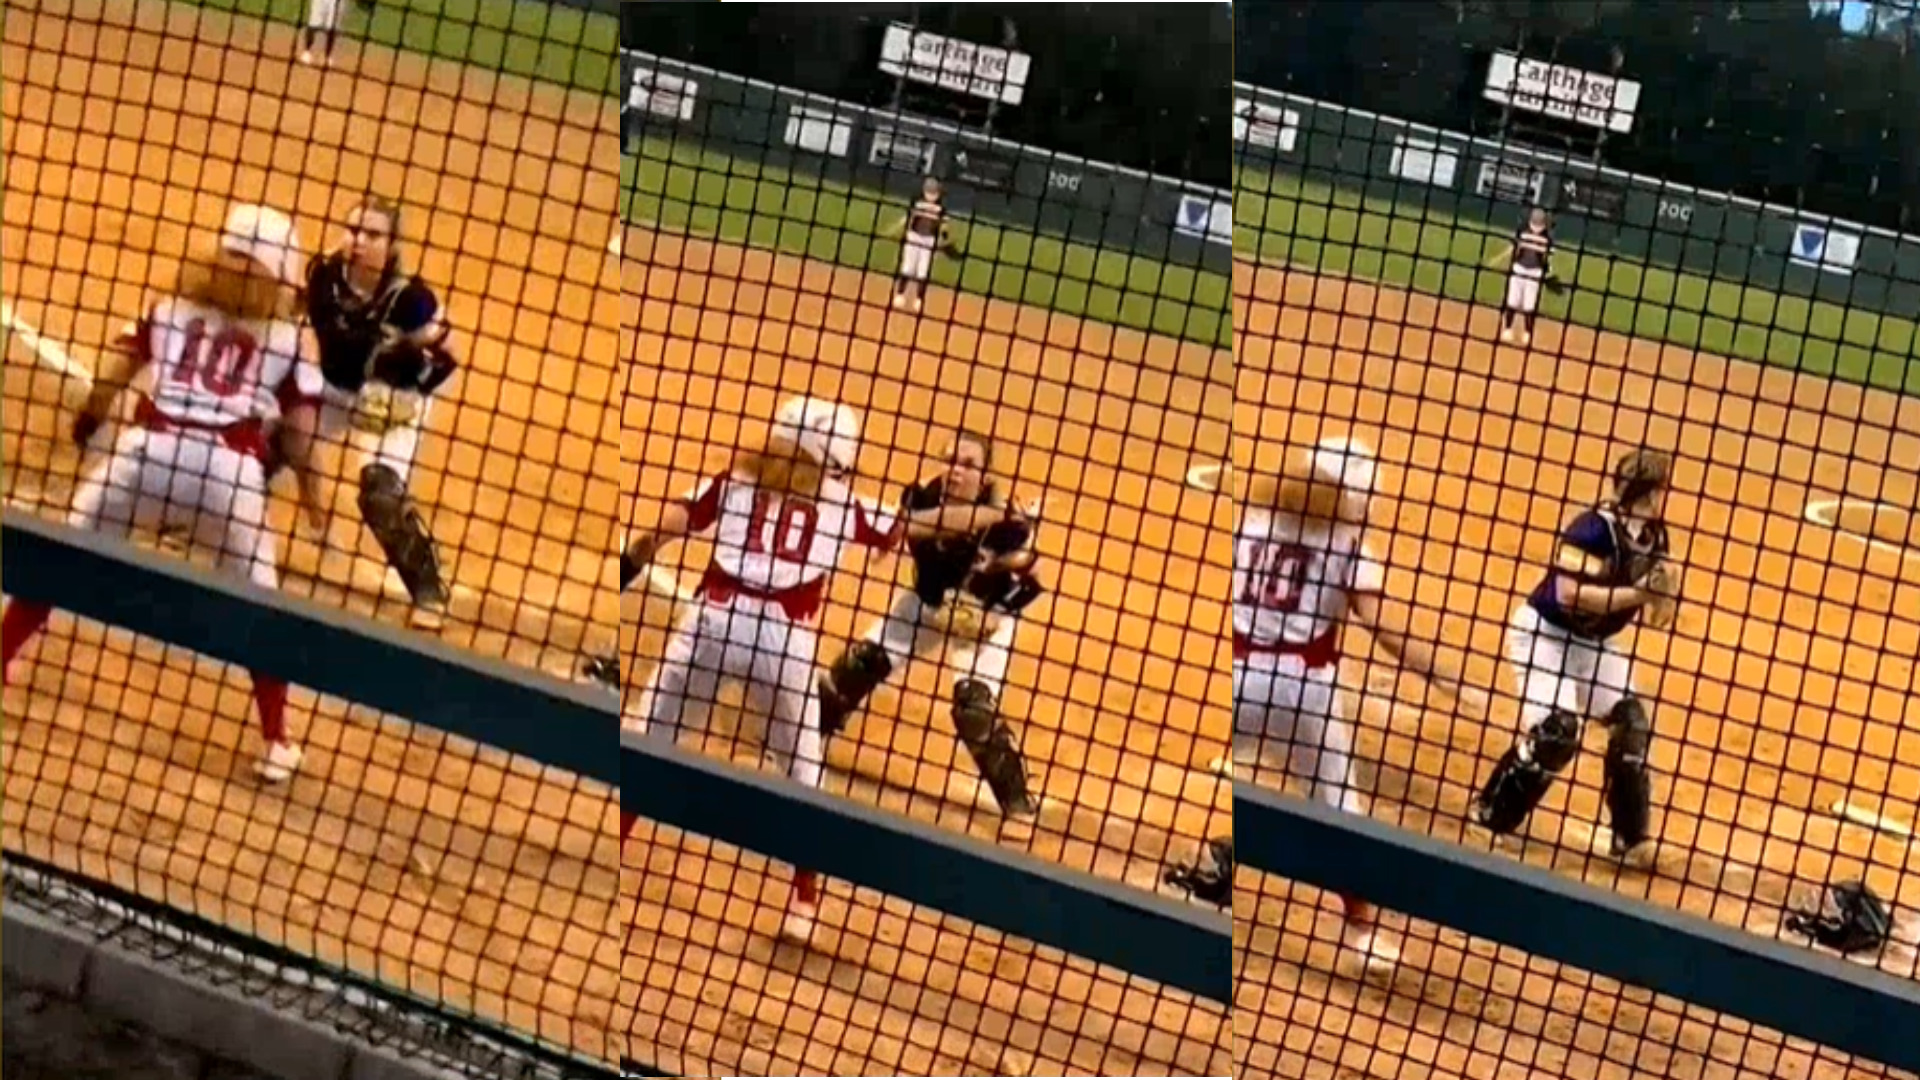 This softball player makes it to third base in a genius way